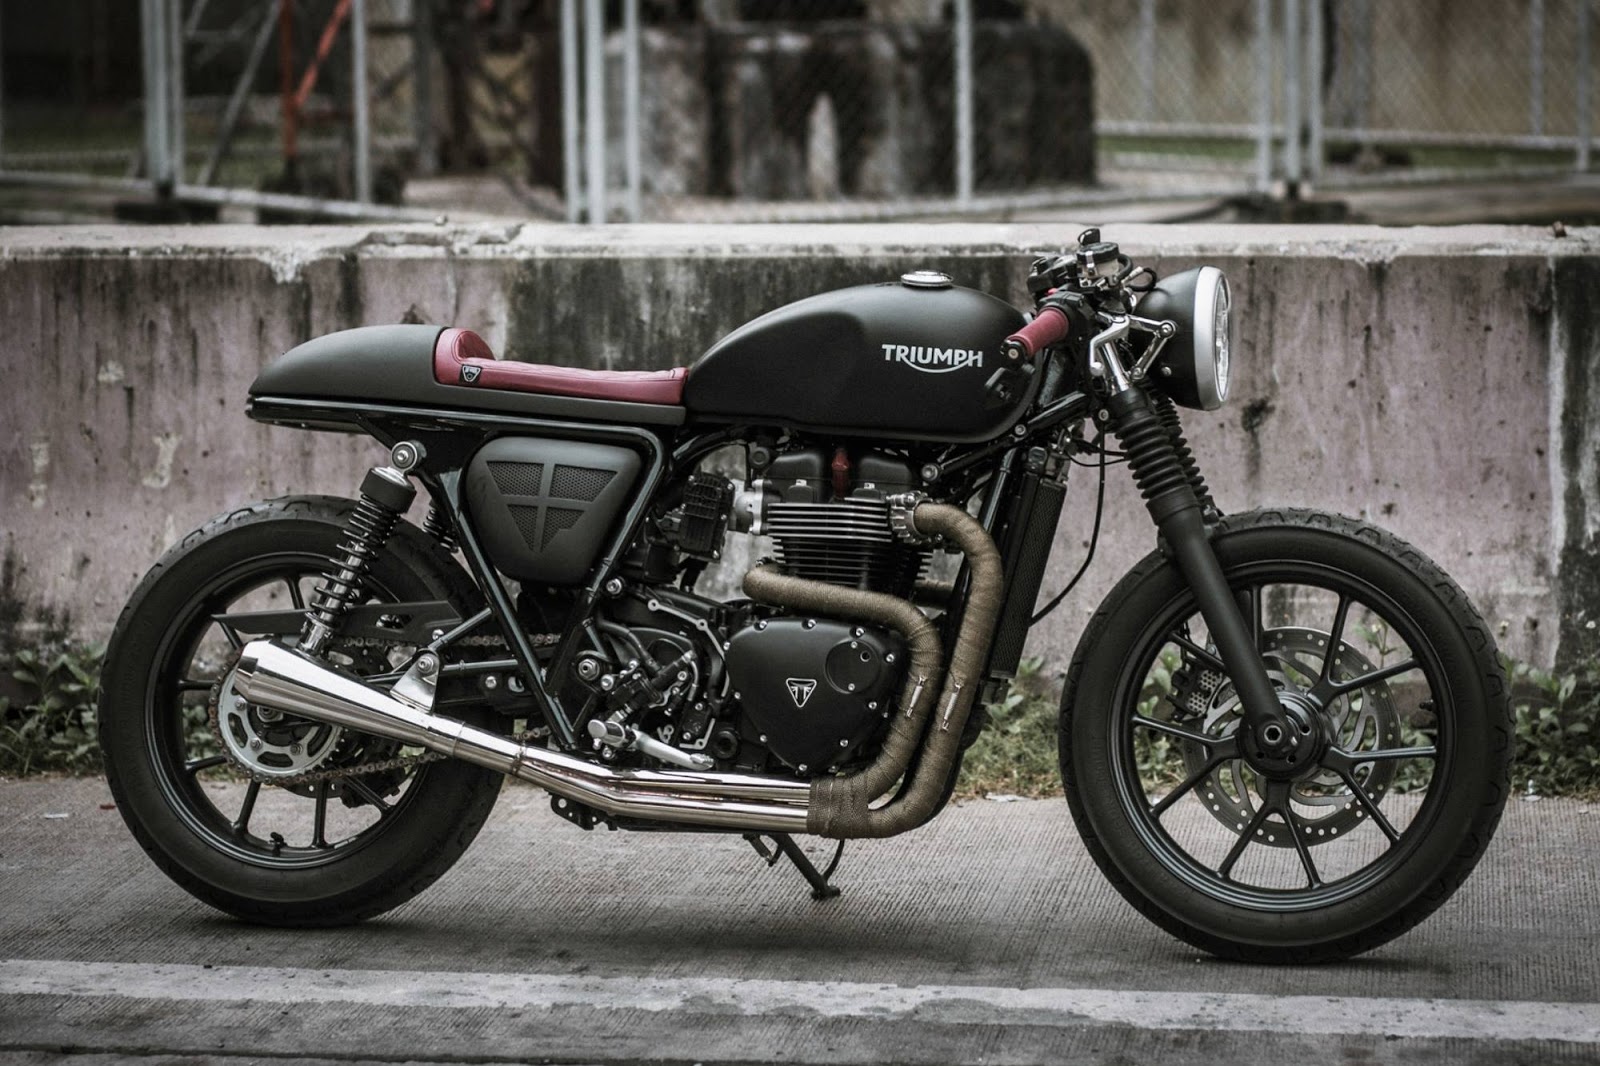 The british customs turn out performance tips for triumph street twin and s...